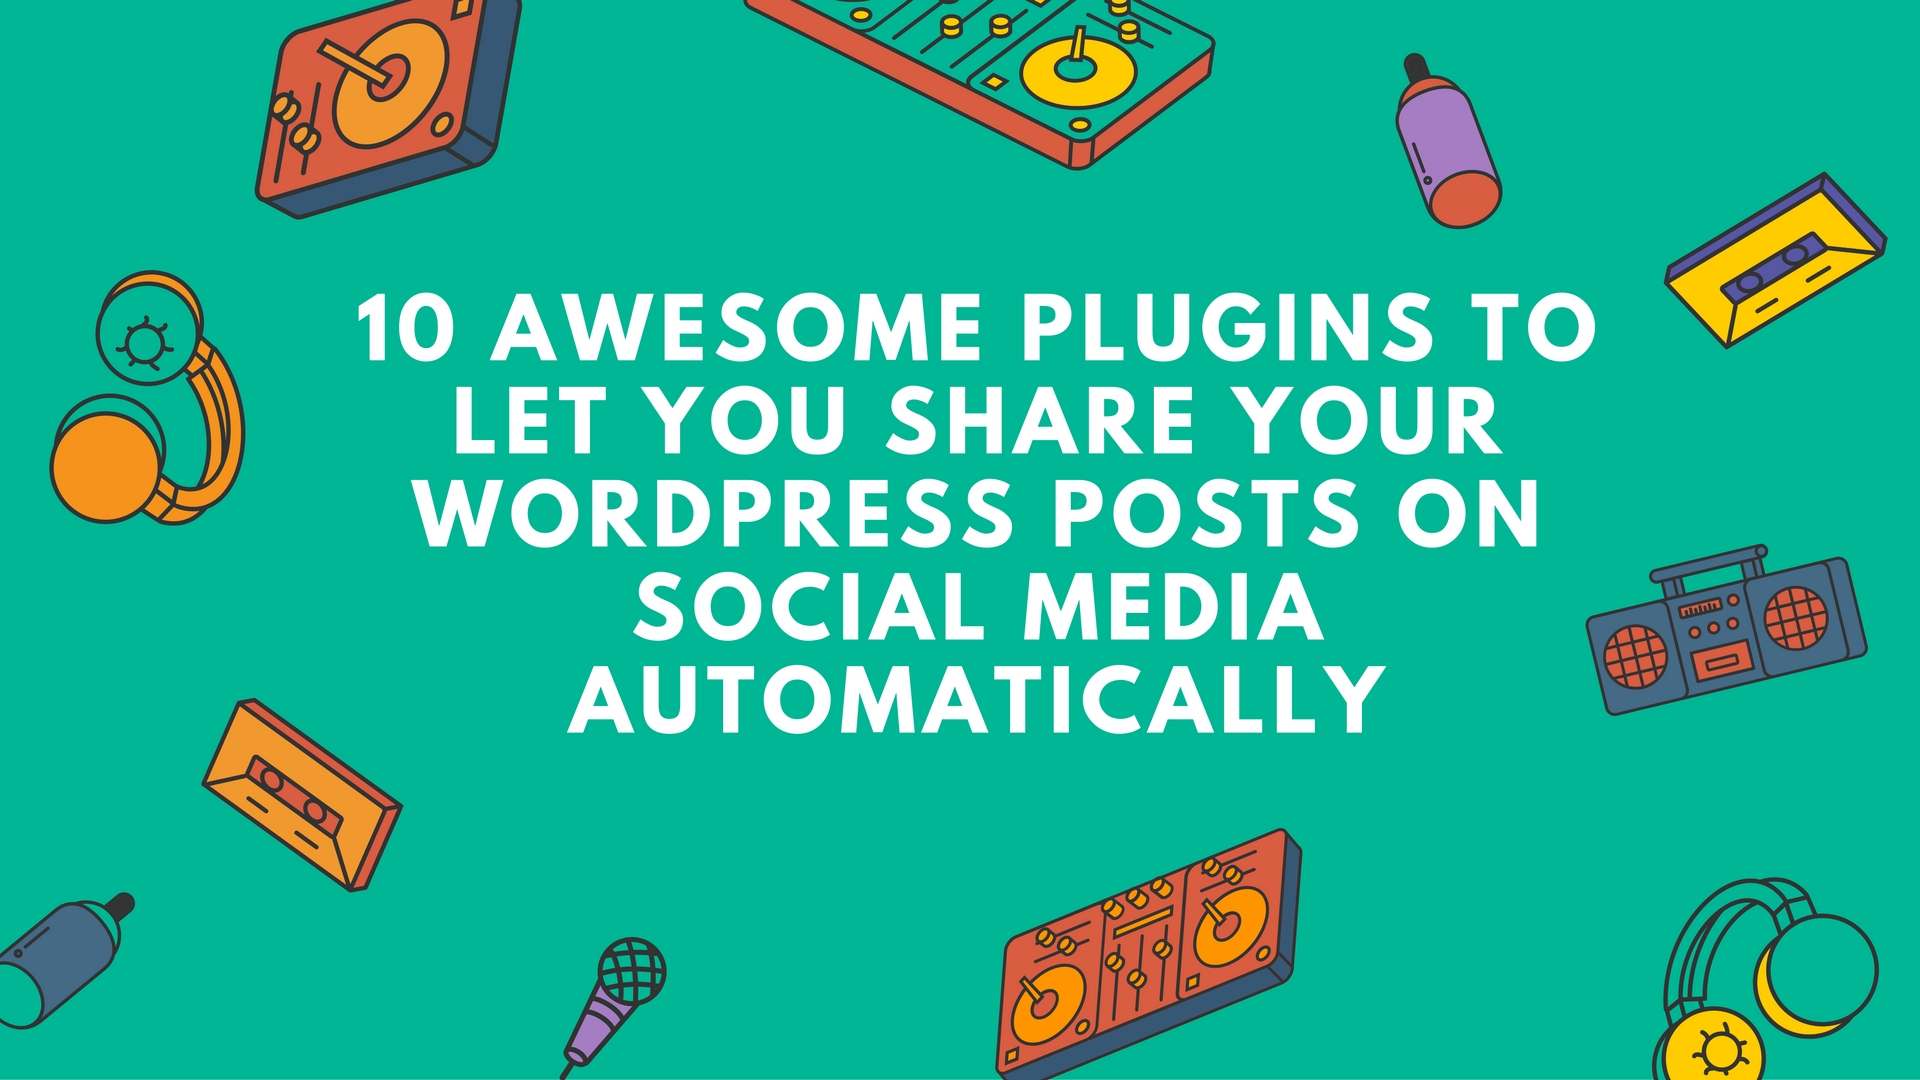 10 Awesome Plugins to Let You Share Your WordPress Posts on Social Media Automatically